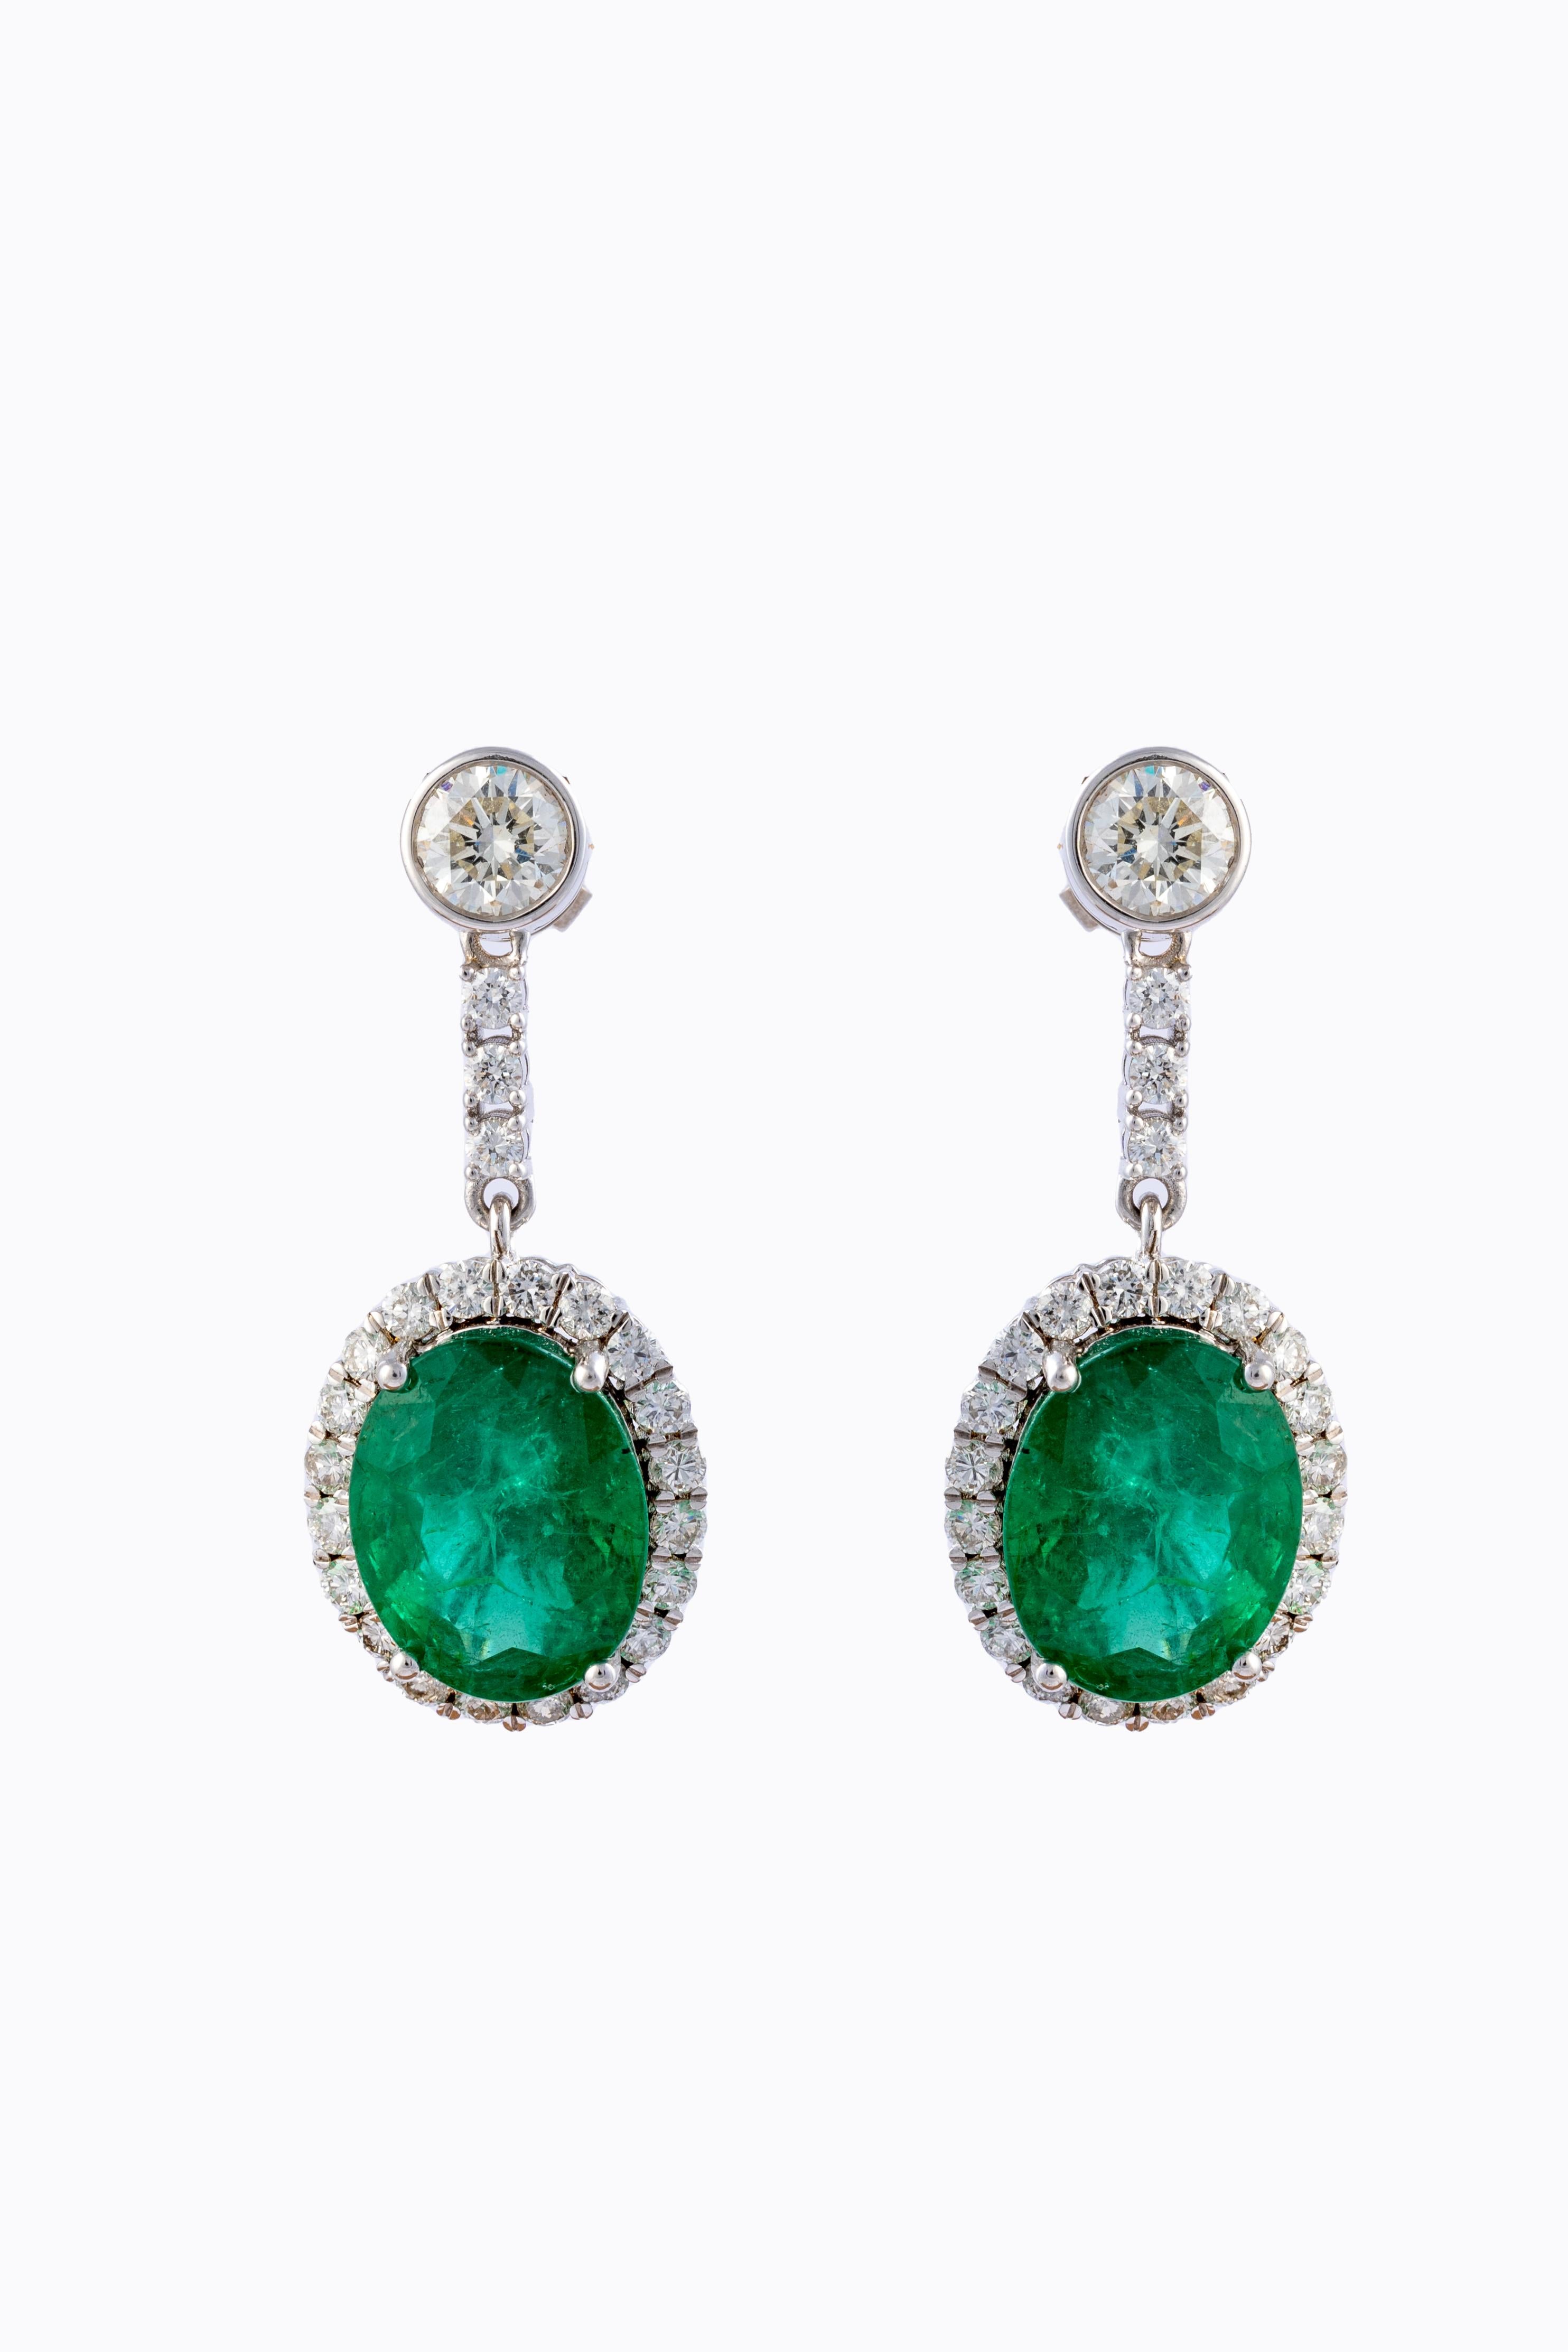 this is simply stunning natural Zambian Emerald earring with 14k gold. the emeralds are of very high quality . the diamonds are of very good quality ( vsi ) purity and G colour

emeralds : 9.65 cts
diamonds : 2.42 cts
gold : 7.29 gms